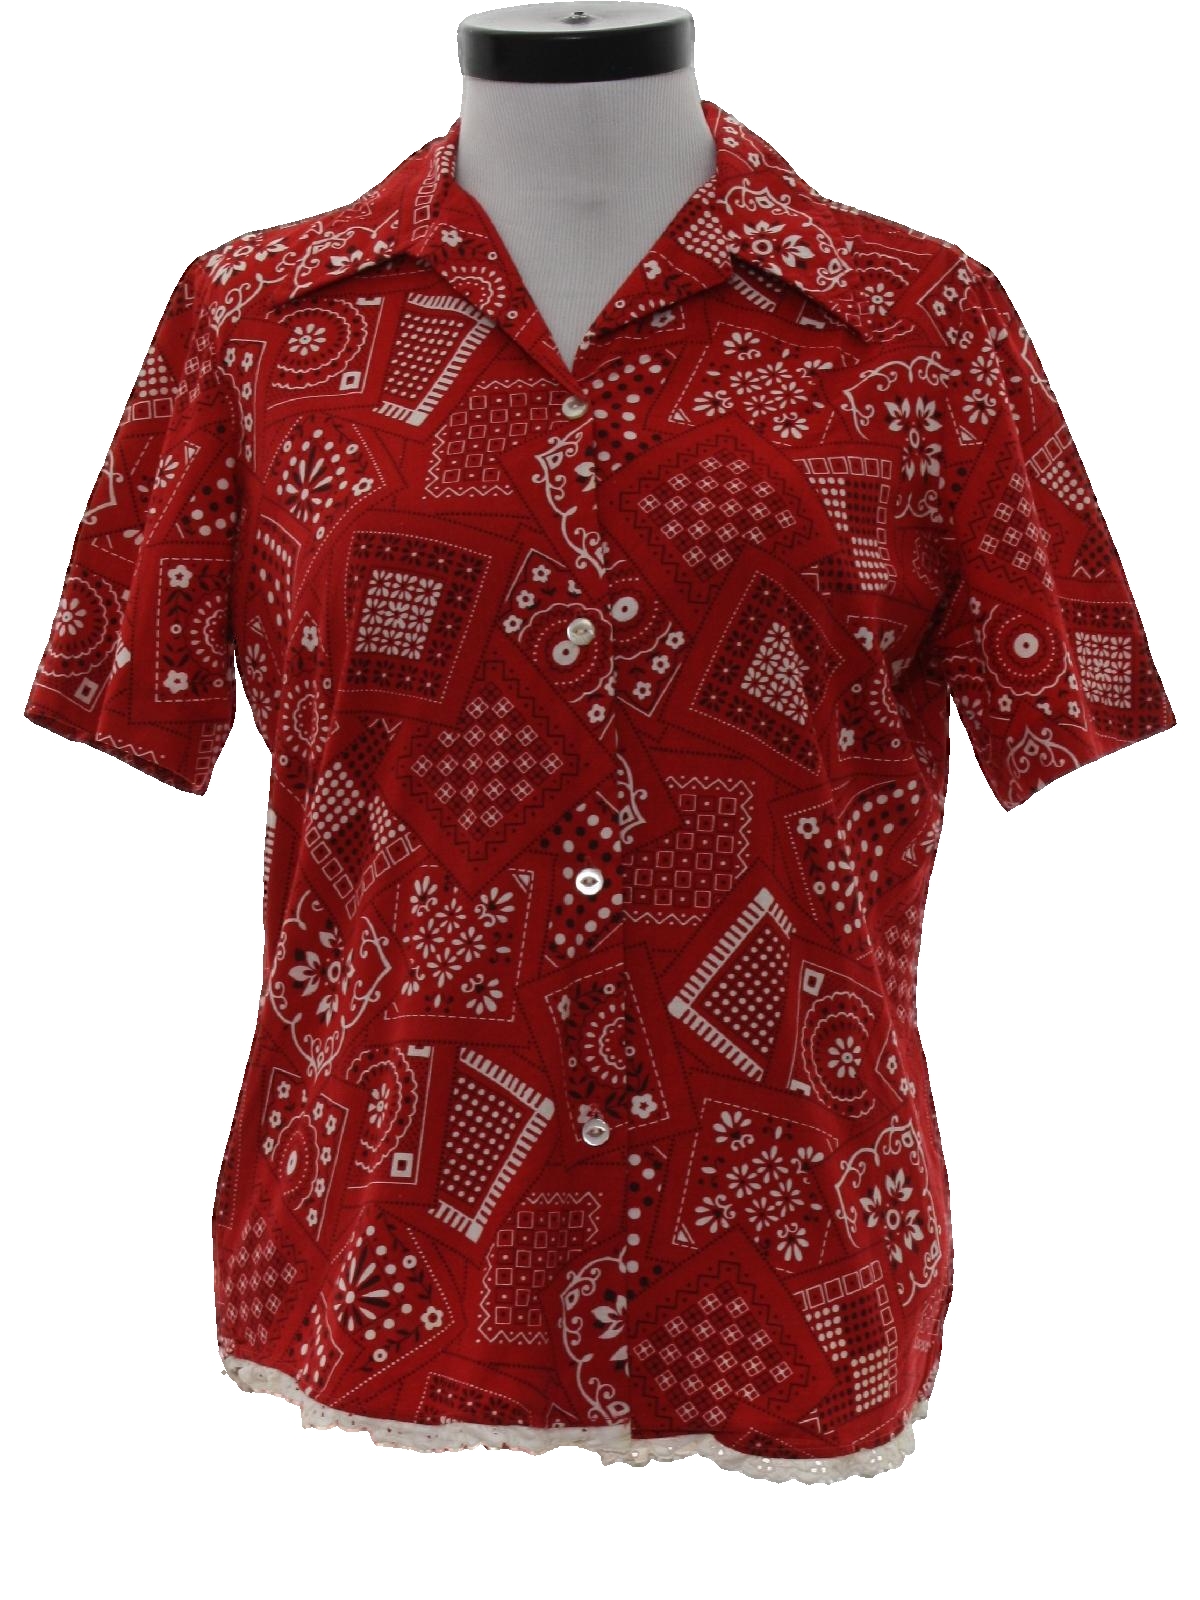 Vintage 70s Hippie Shirt: 70s -Durable Press- Womens red with black and ...